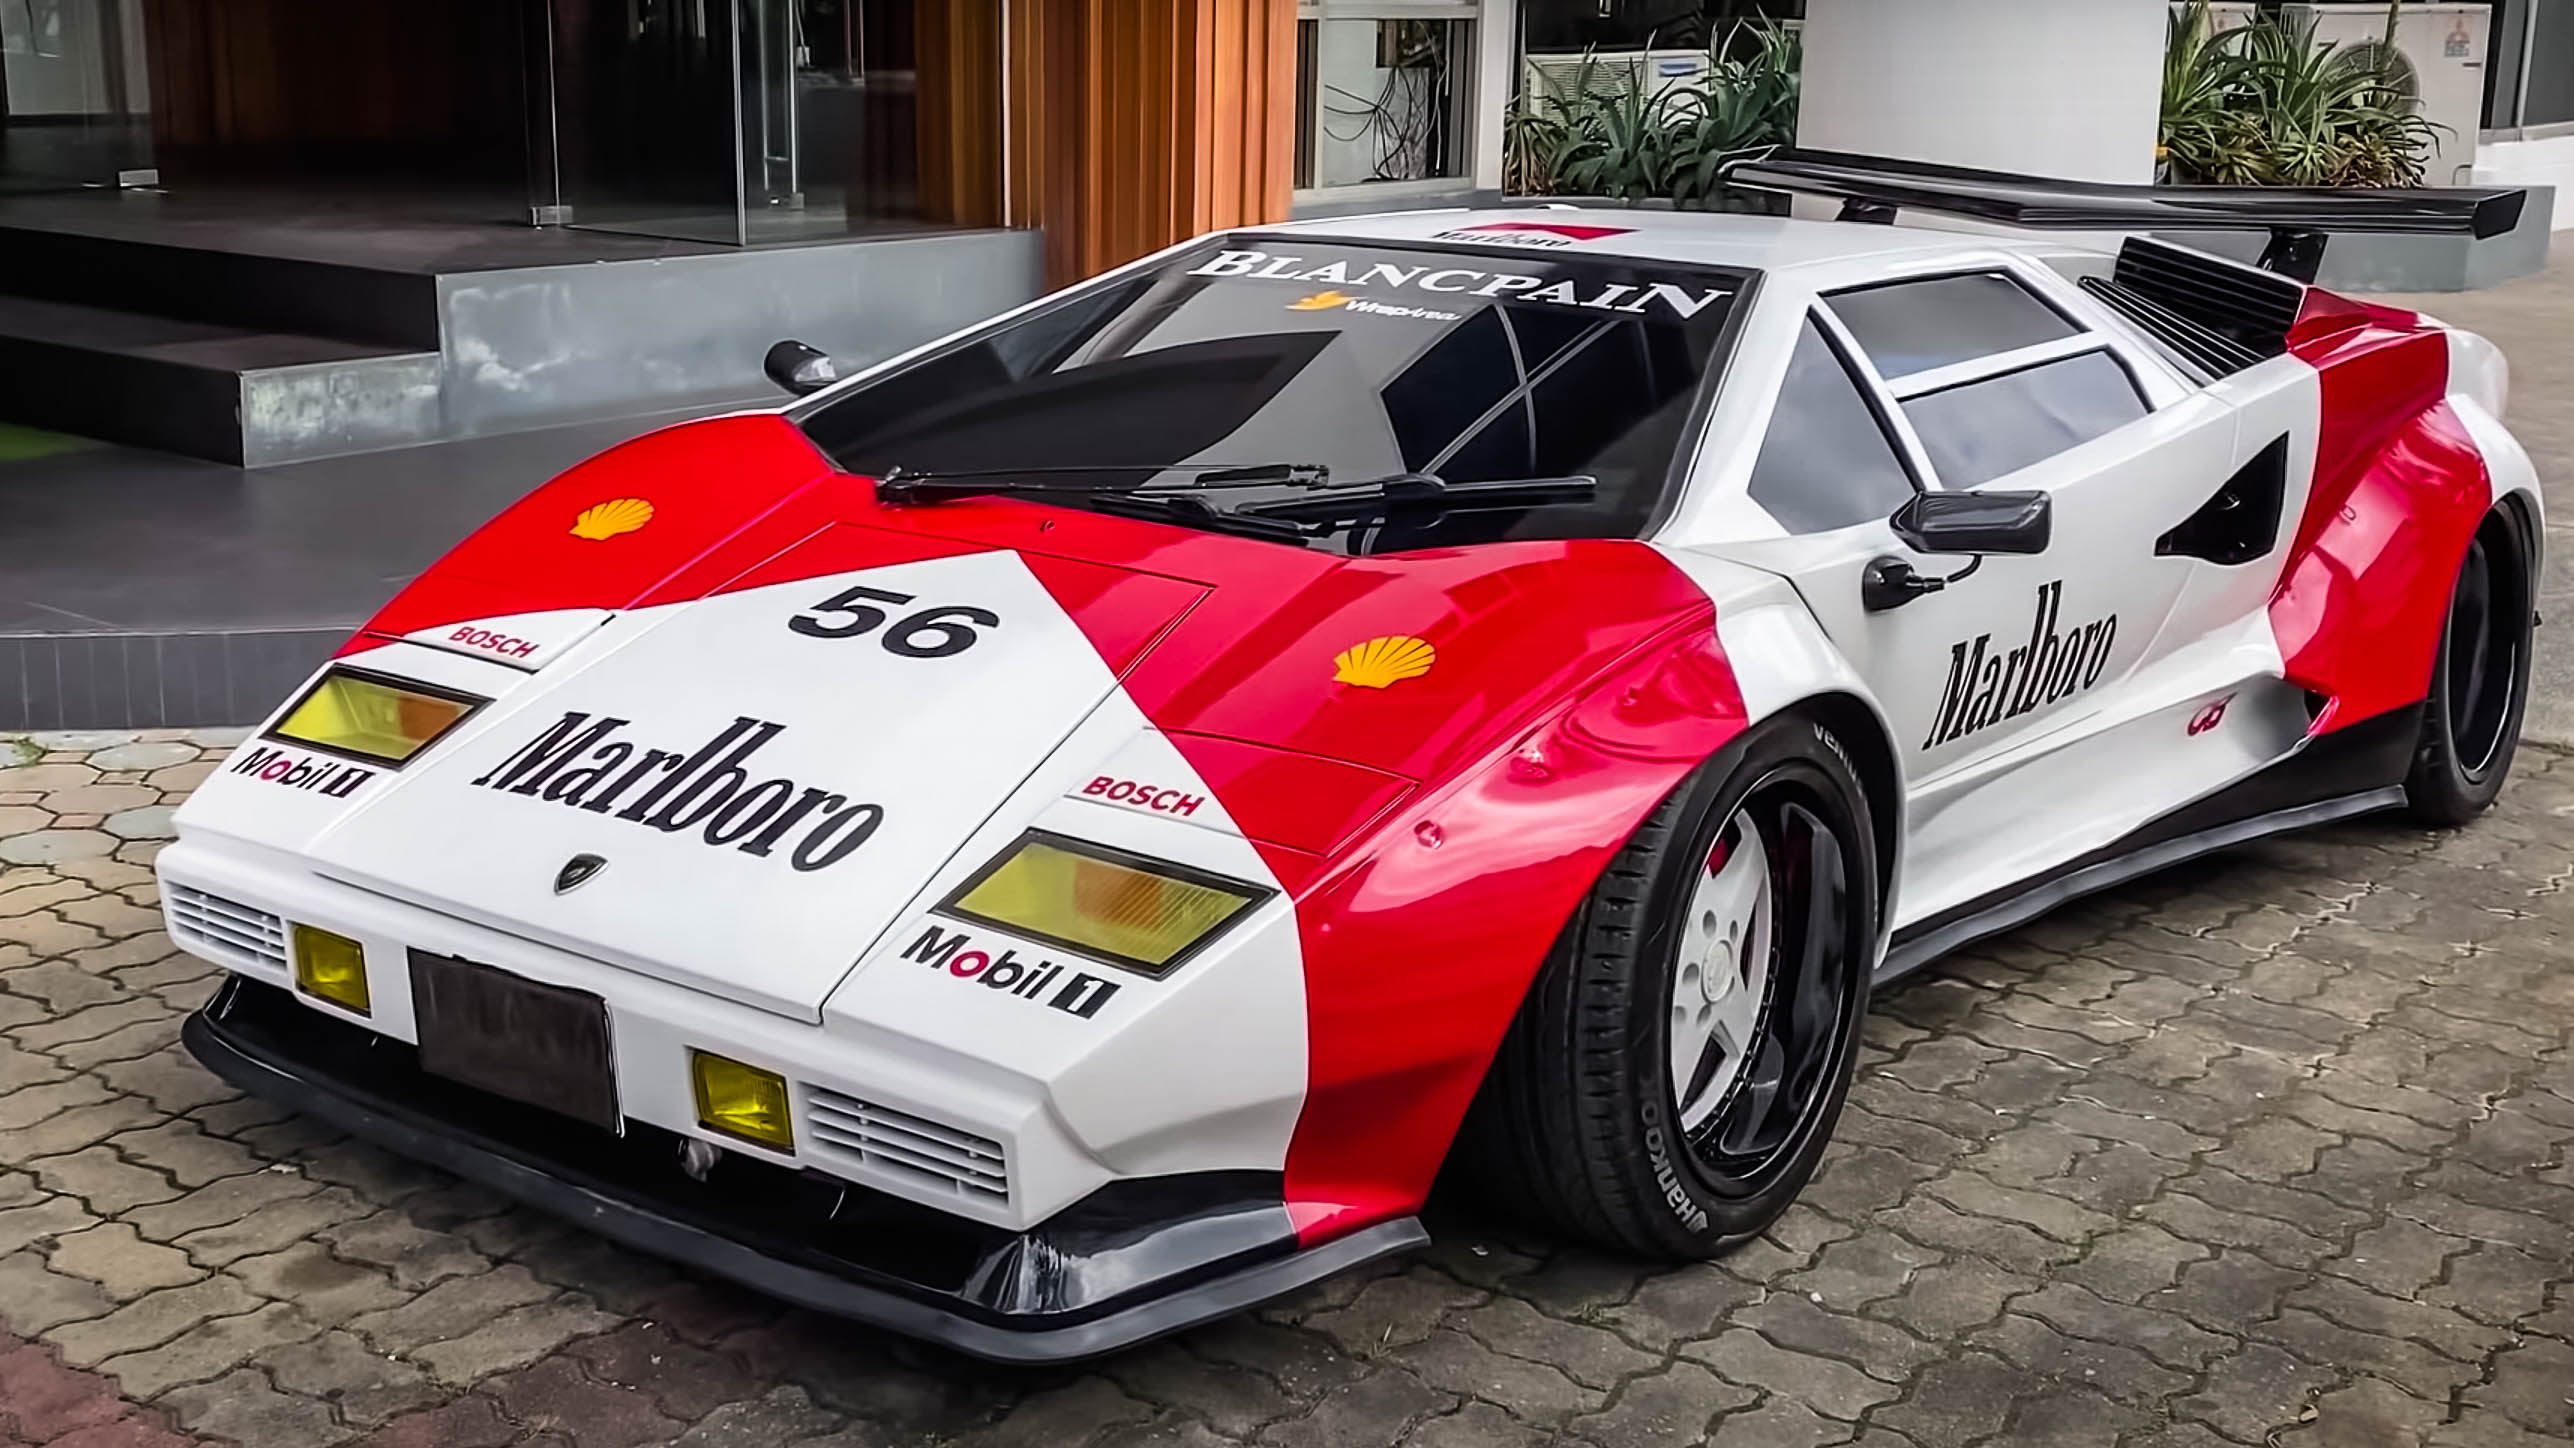 Video A Lamborghini Countach Replica With The V8 Heart Of A Lexus And A Hyundai Chassis Caradvice